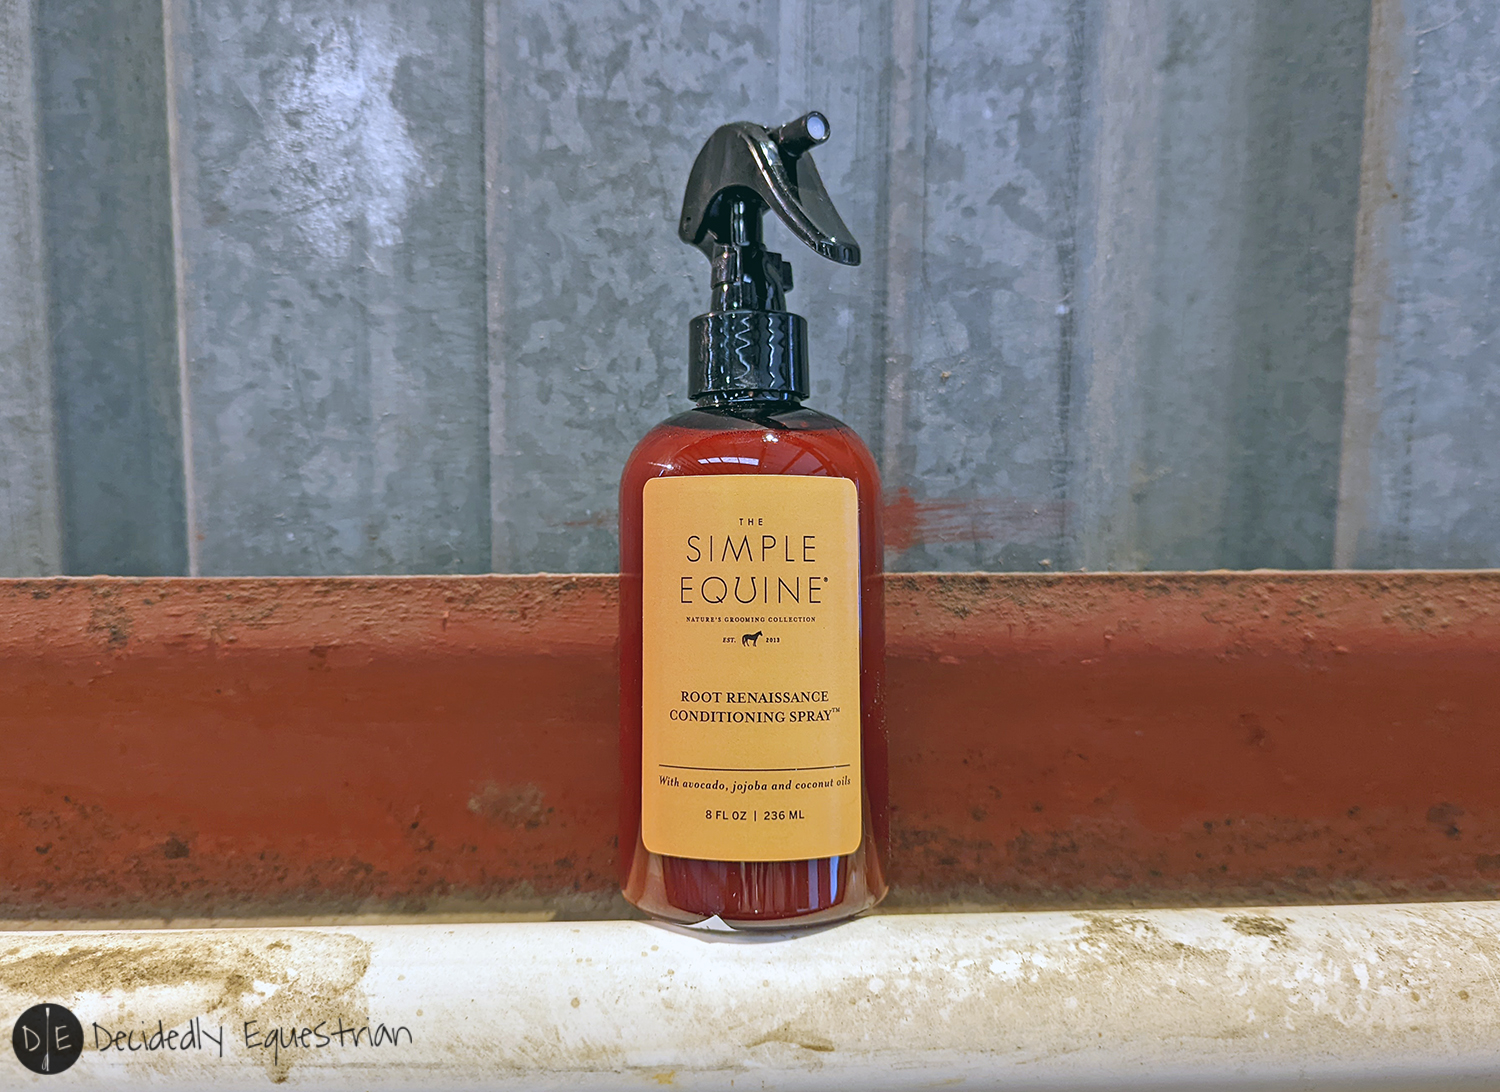 The Simple Equine Root Renaissance Conditioning Spray Review